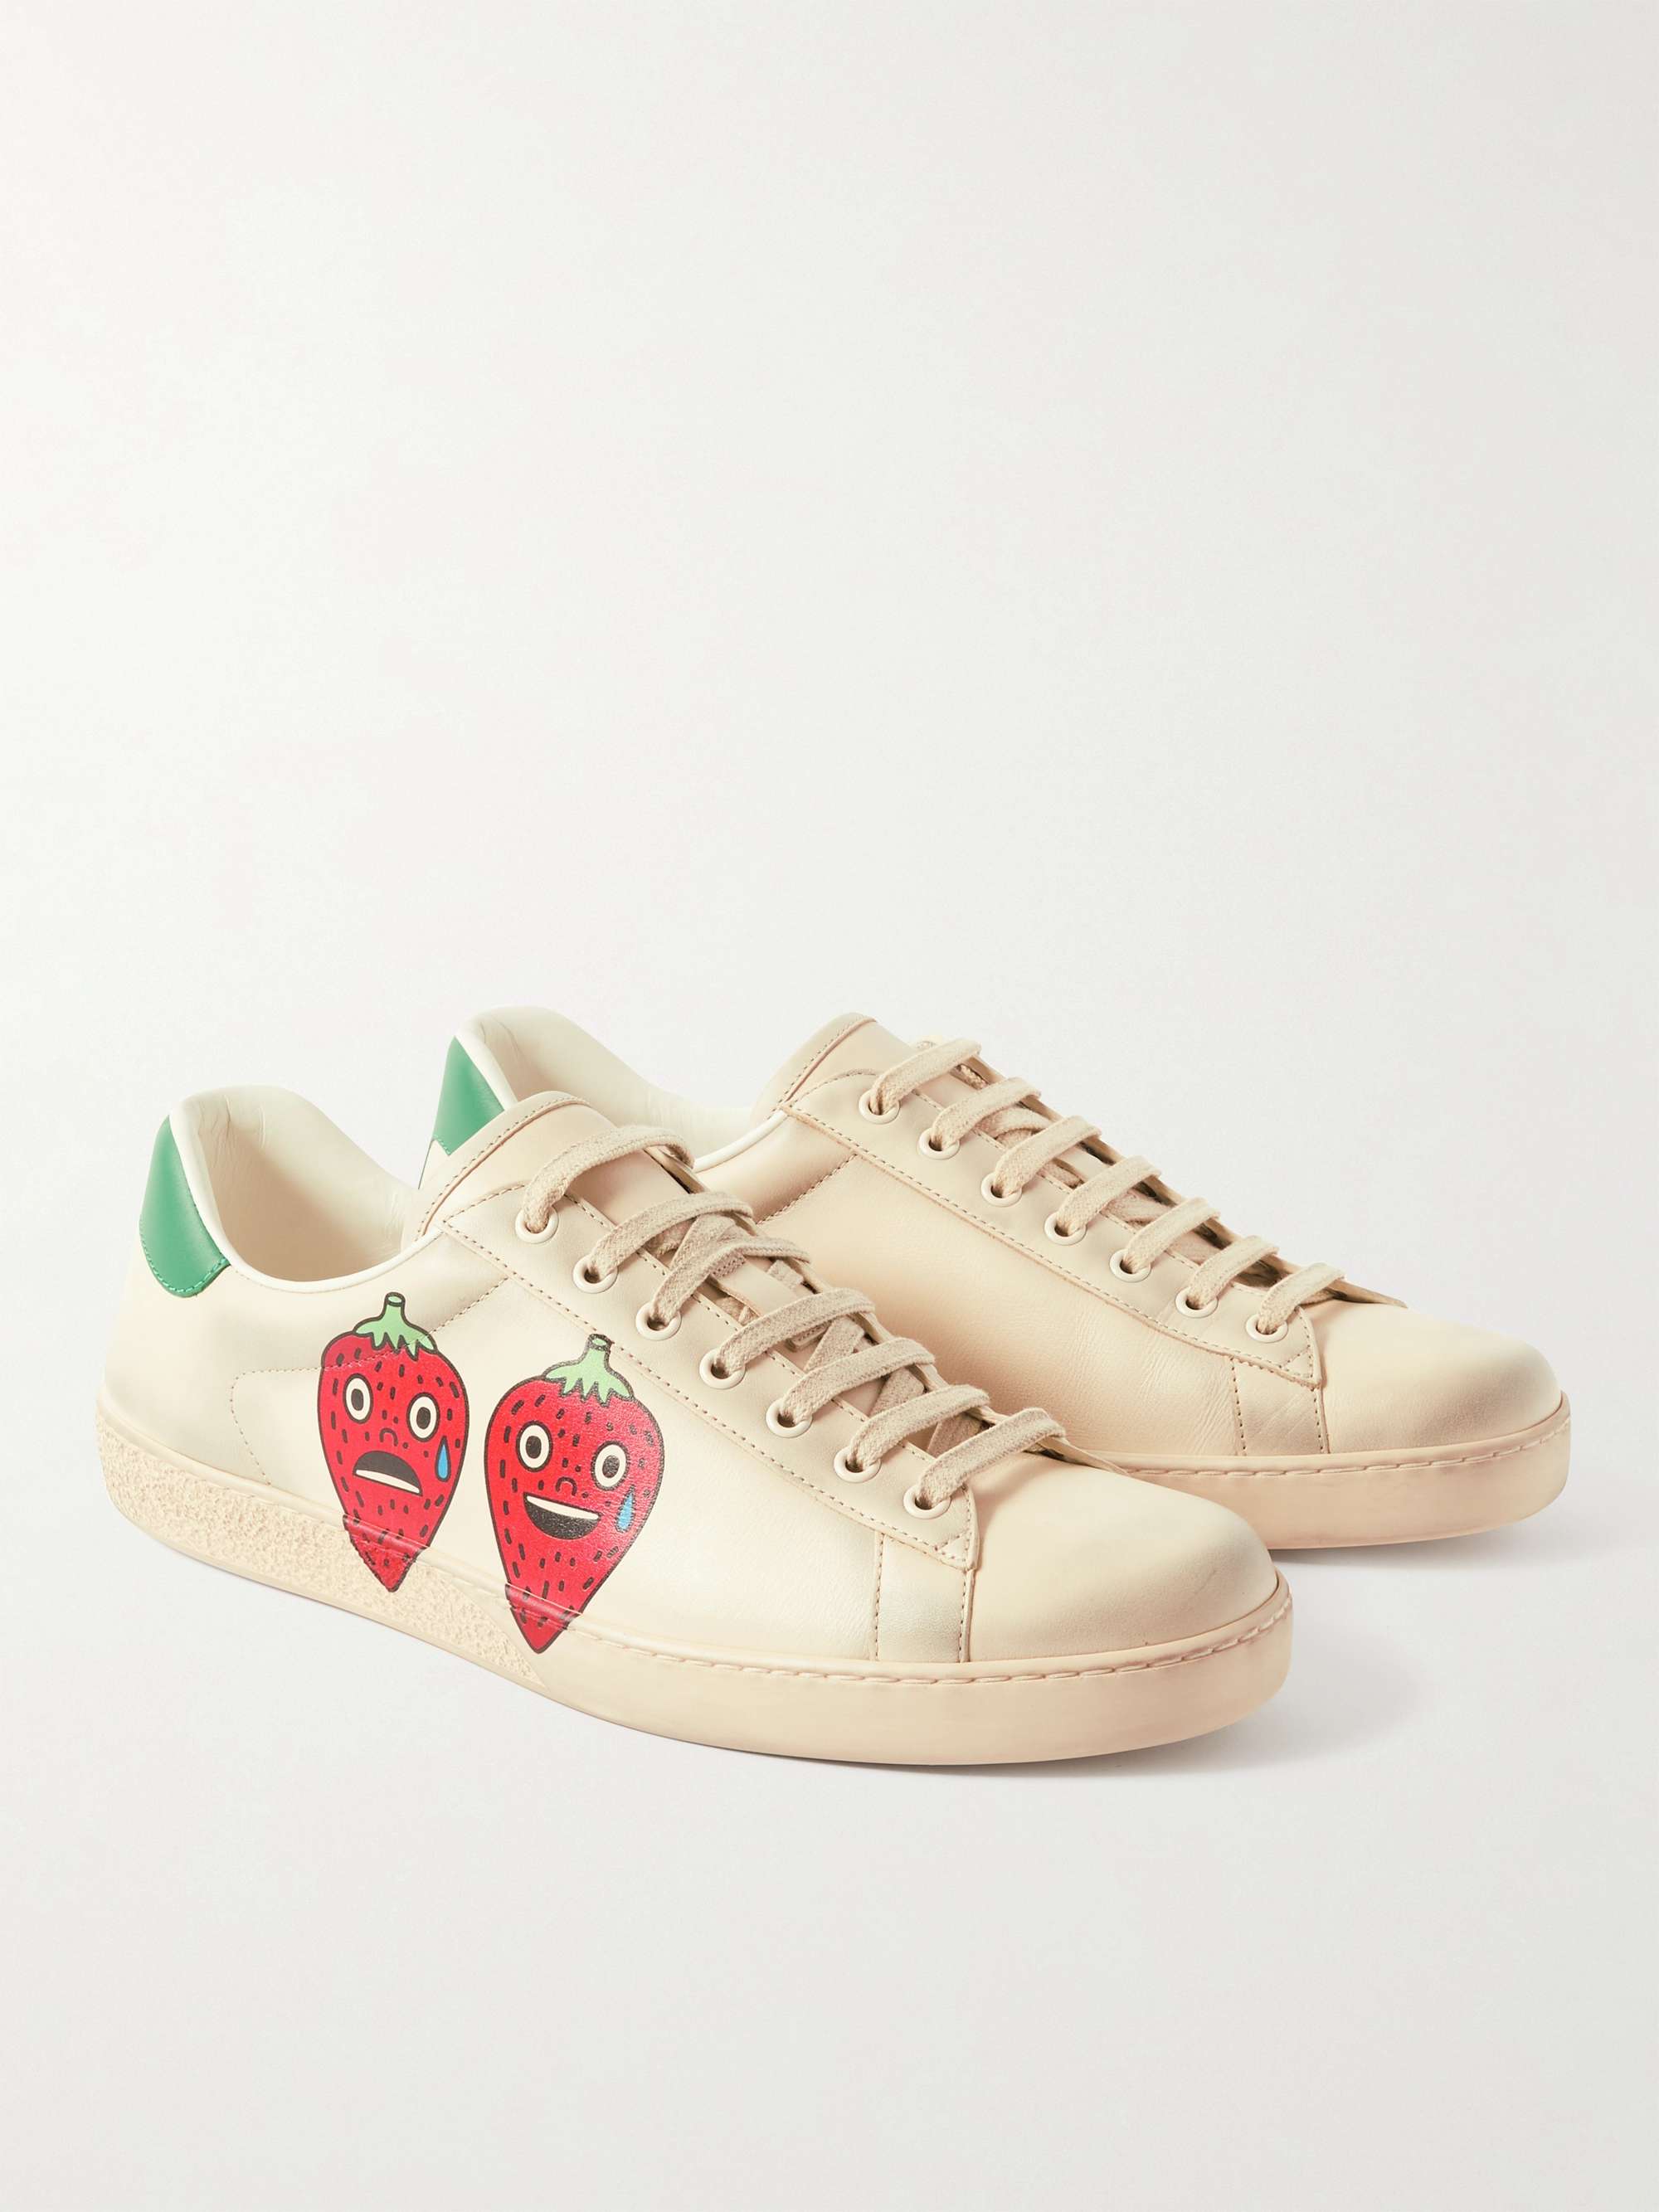 GUCCI New Ace Printed Leather Sneakers